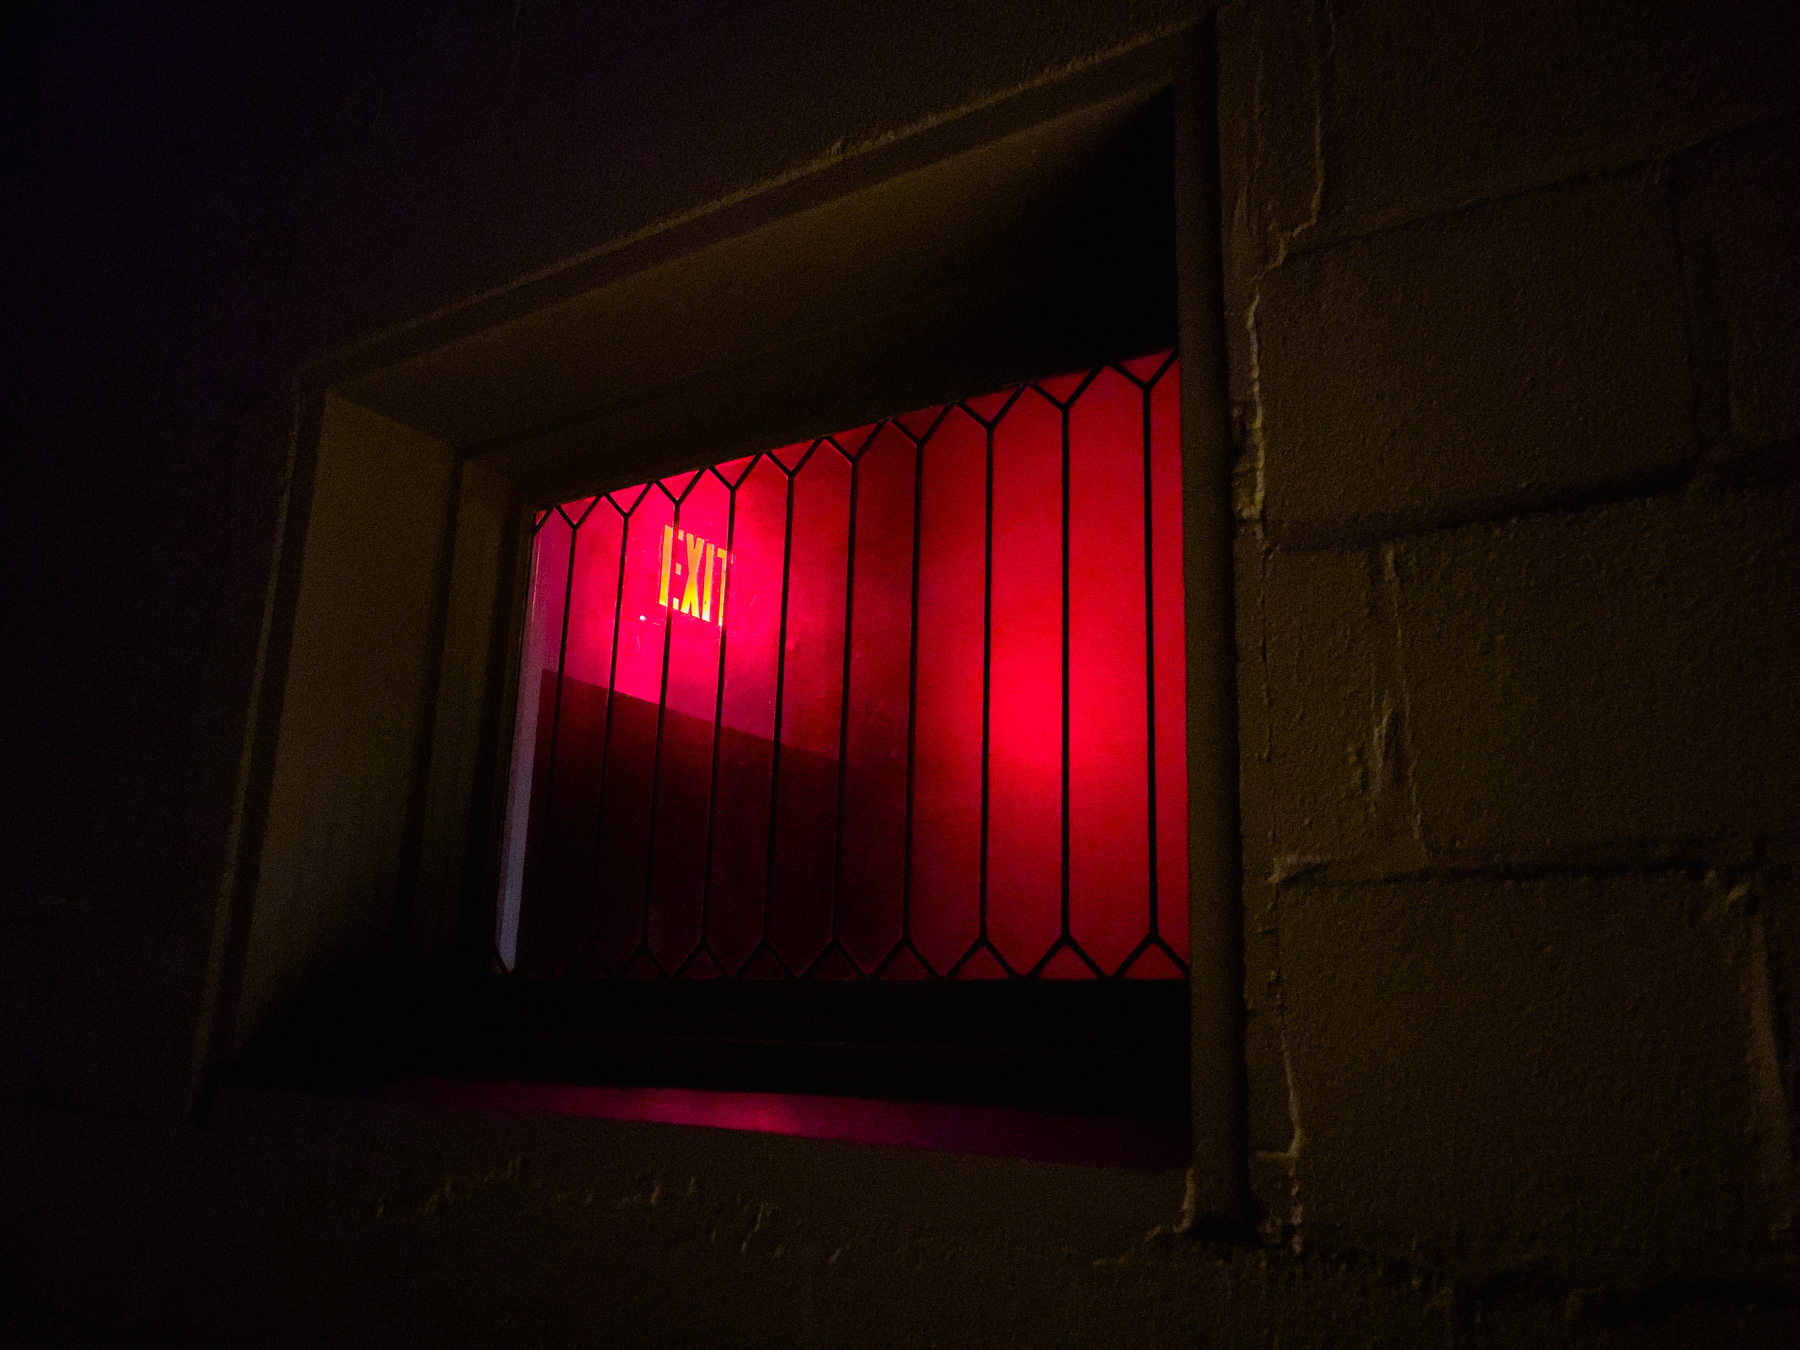 Red illuminated exit sign through a building window.